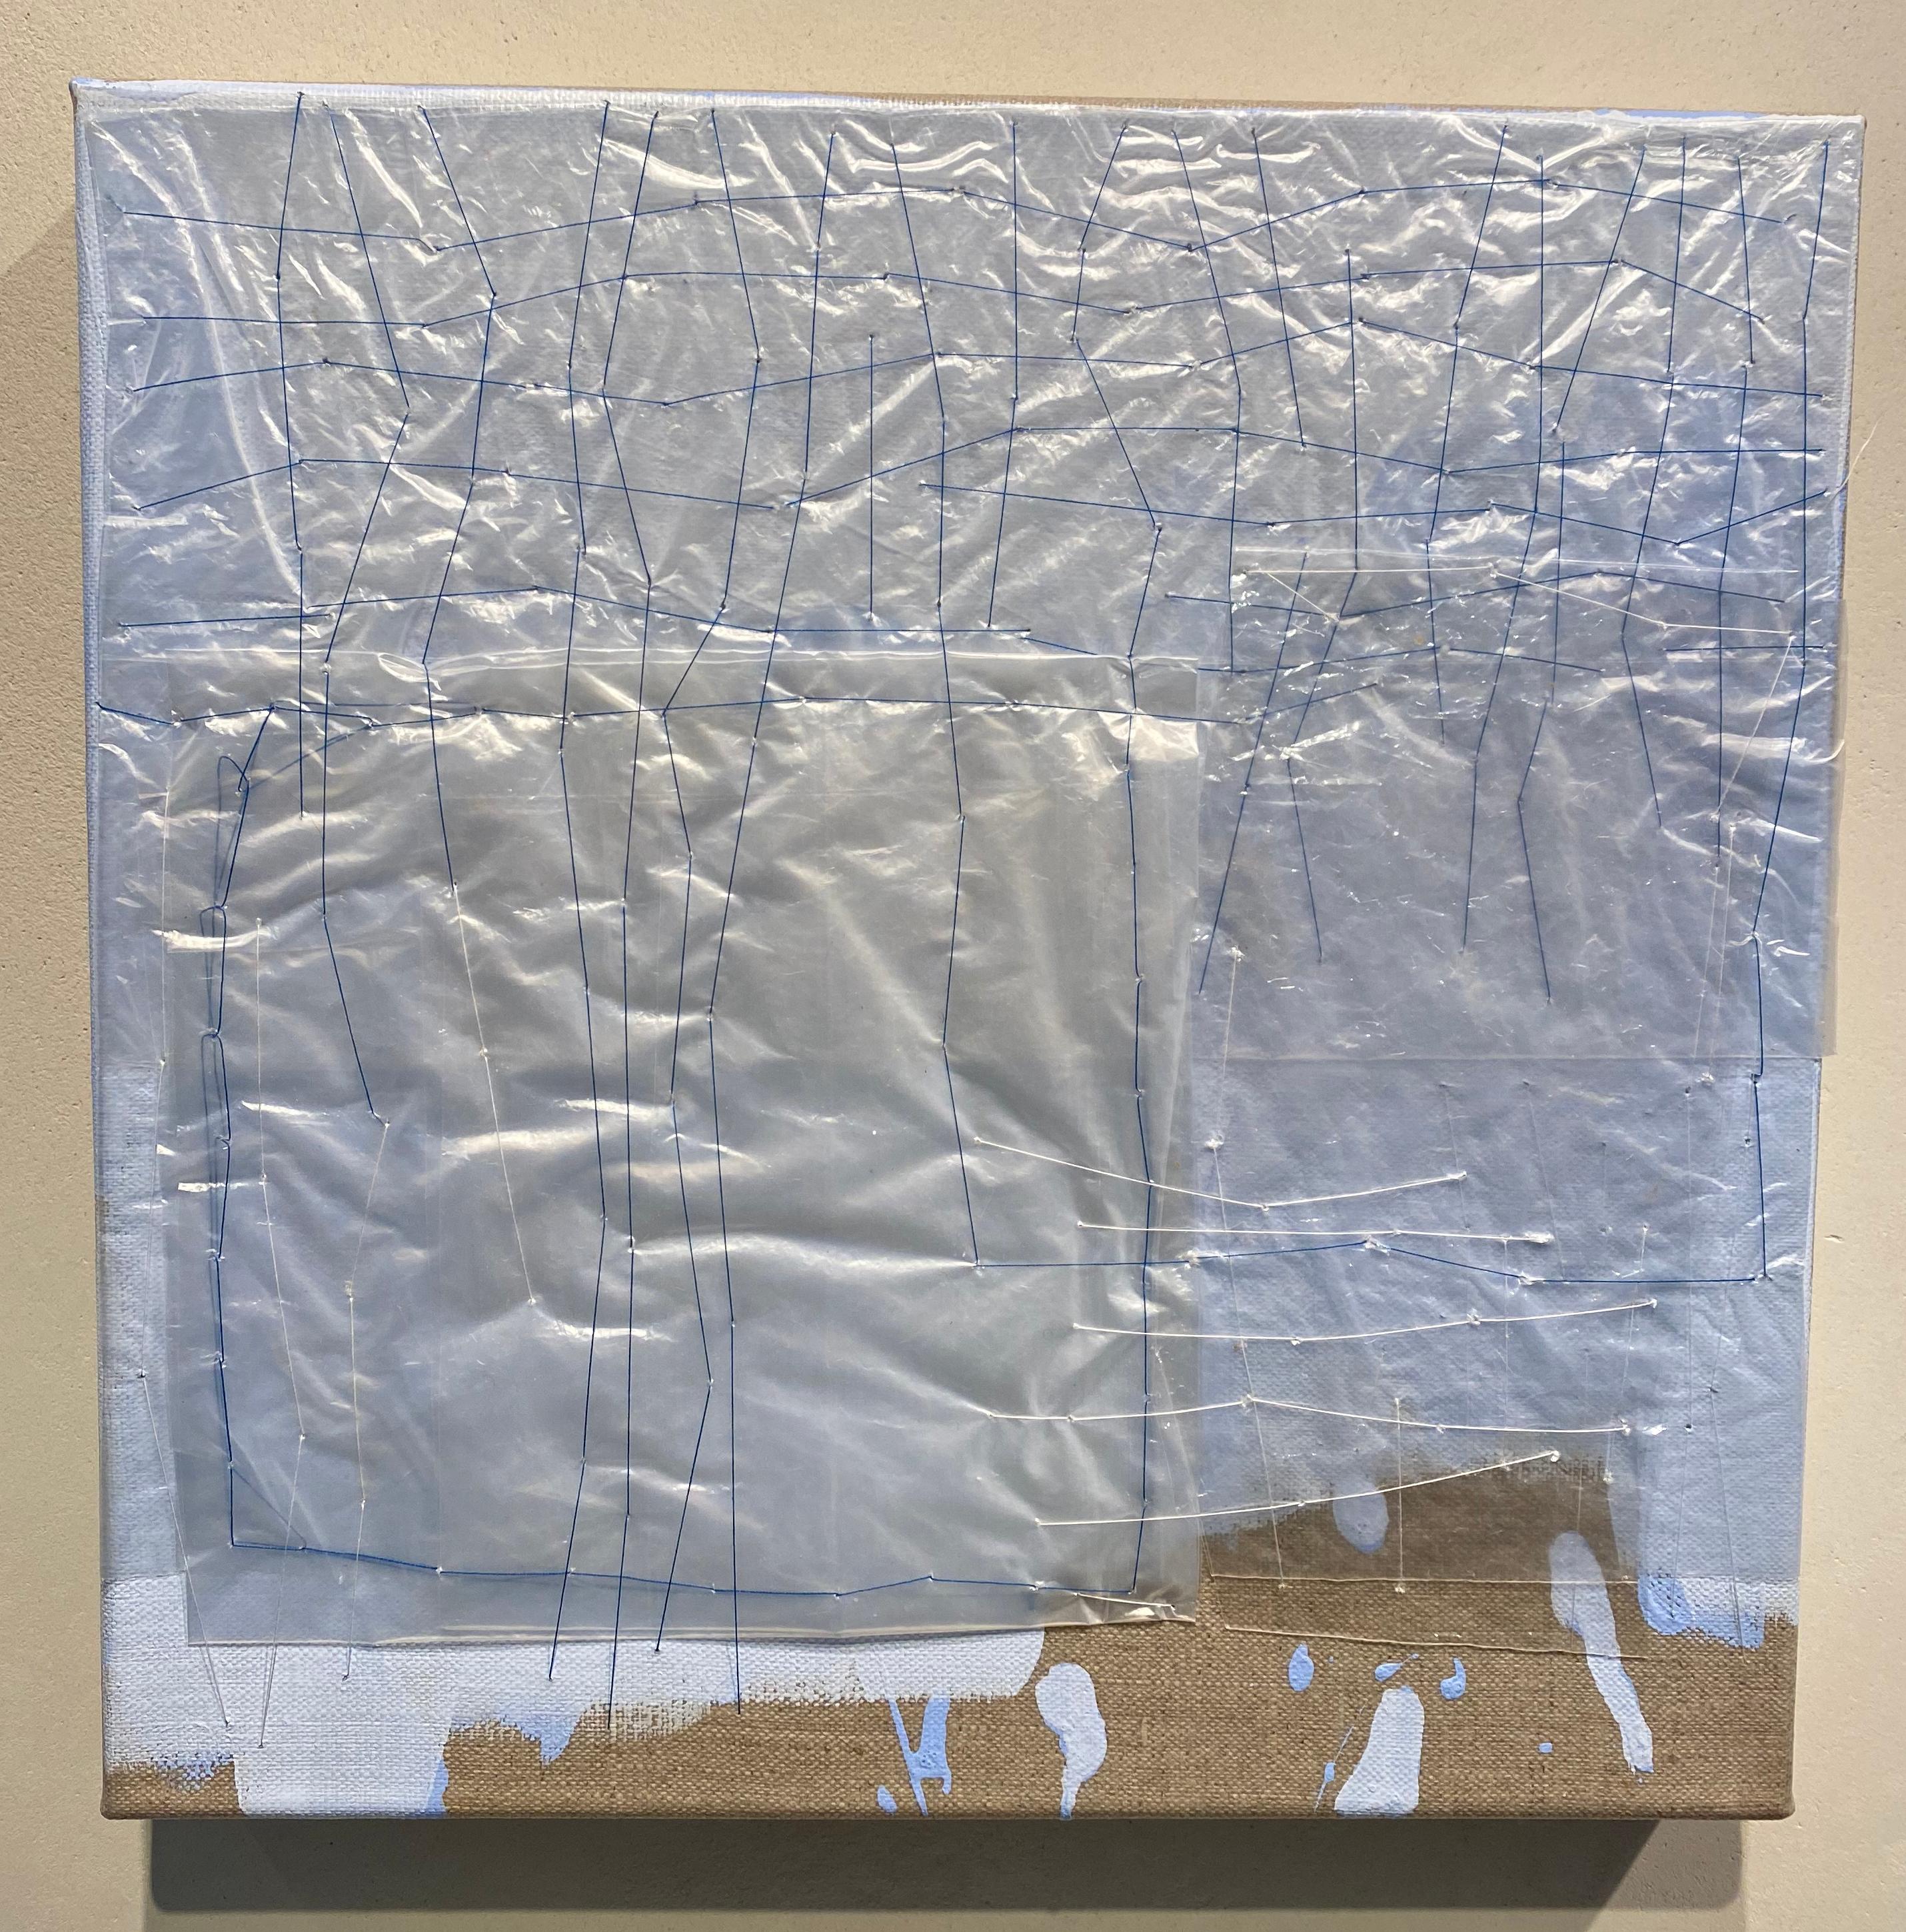 Nuvola- abstract painting, mixed media, with plastic bags, acrylic on linen - Painting by Holly Miller